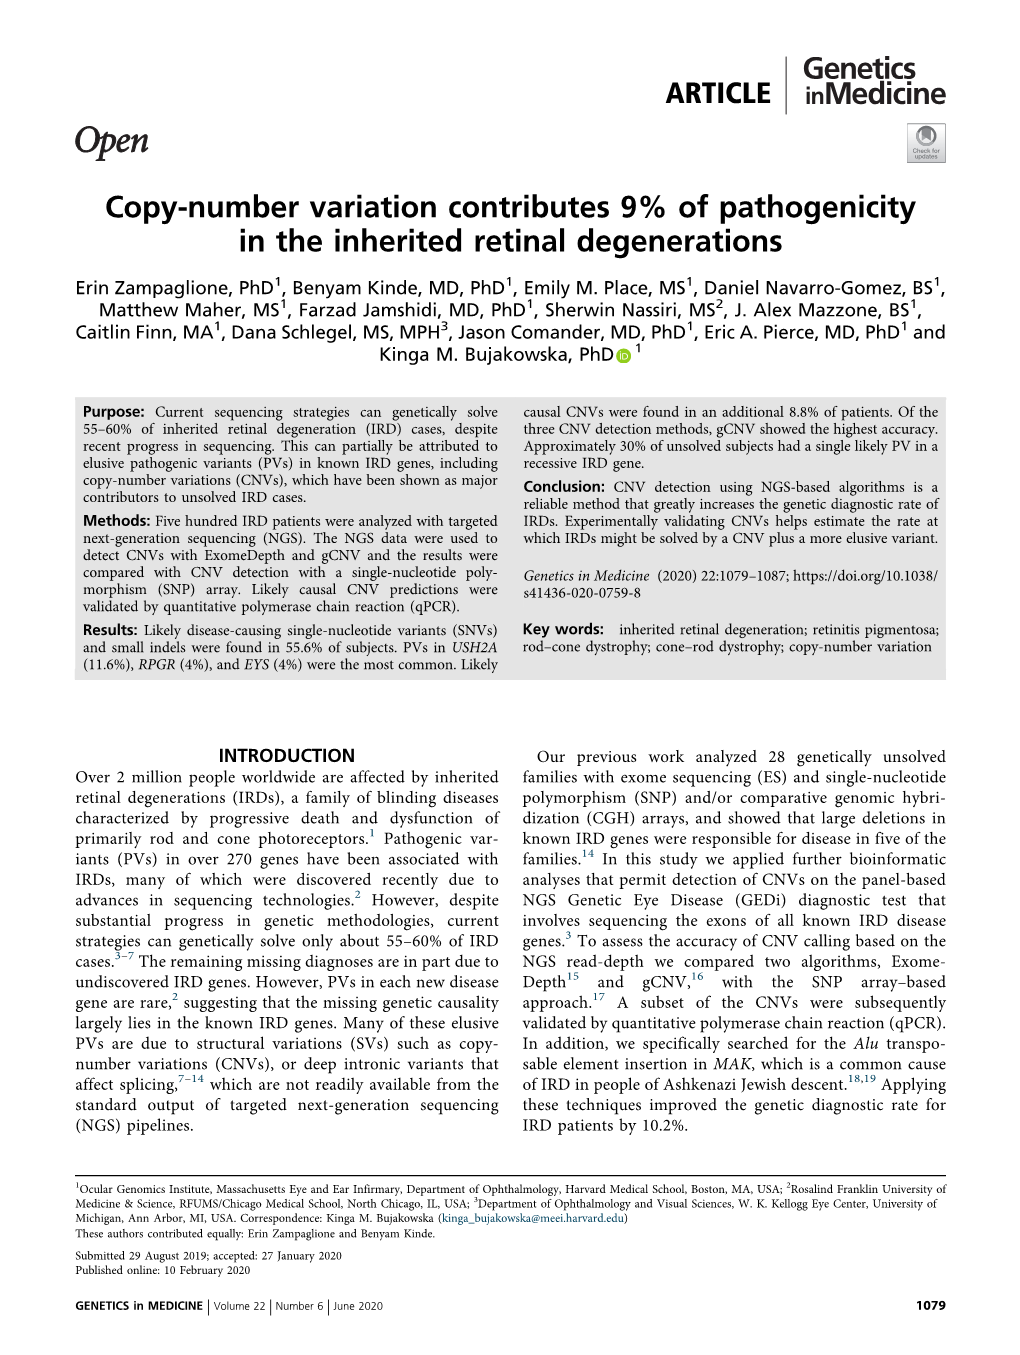 Copy-Number Variation Contributes 9% of Pathogenicity in the Inherited Retinal Degenerations